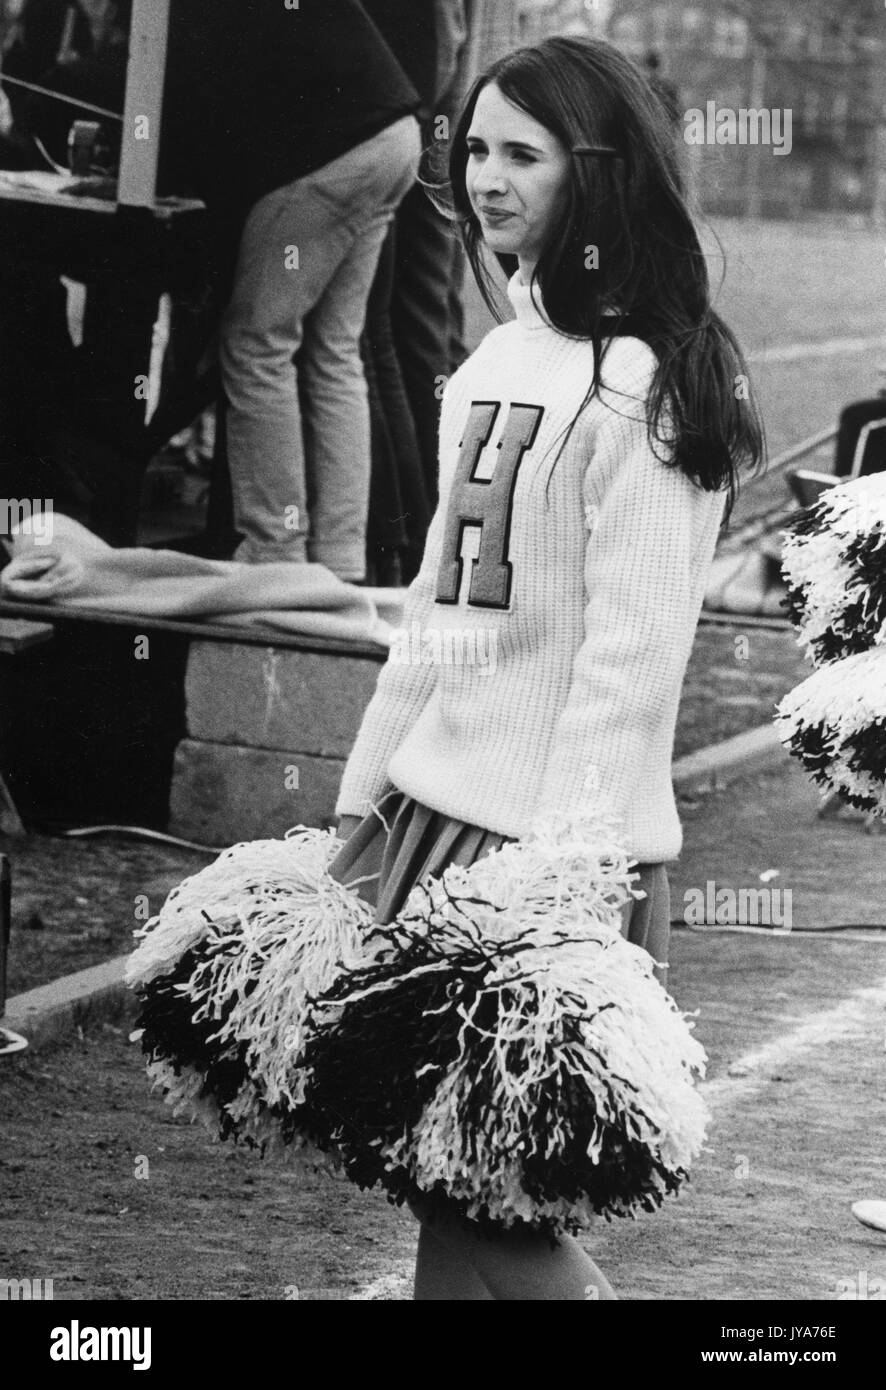 A female undergraduate student at Johns Hopkins University cheerleads during a sporting event on the Homewood campus in Baltimore, Maryland during the first years that the university's undergraduate program admitted women. 1970. Stock Photo